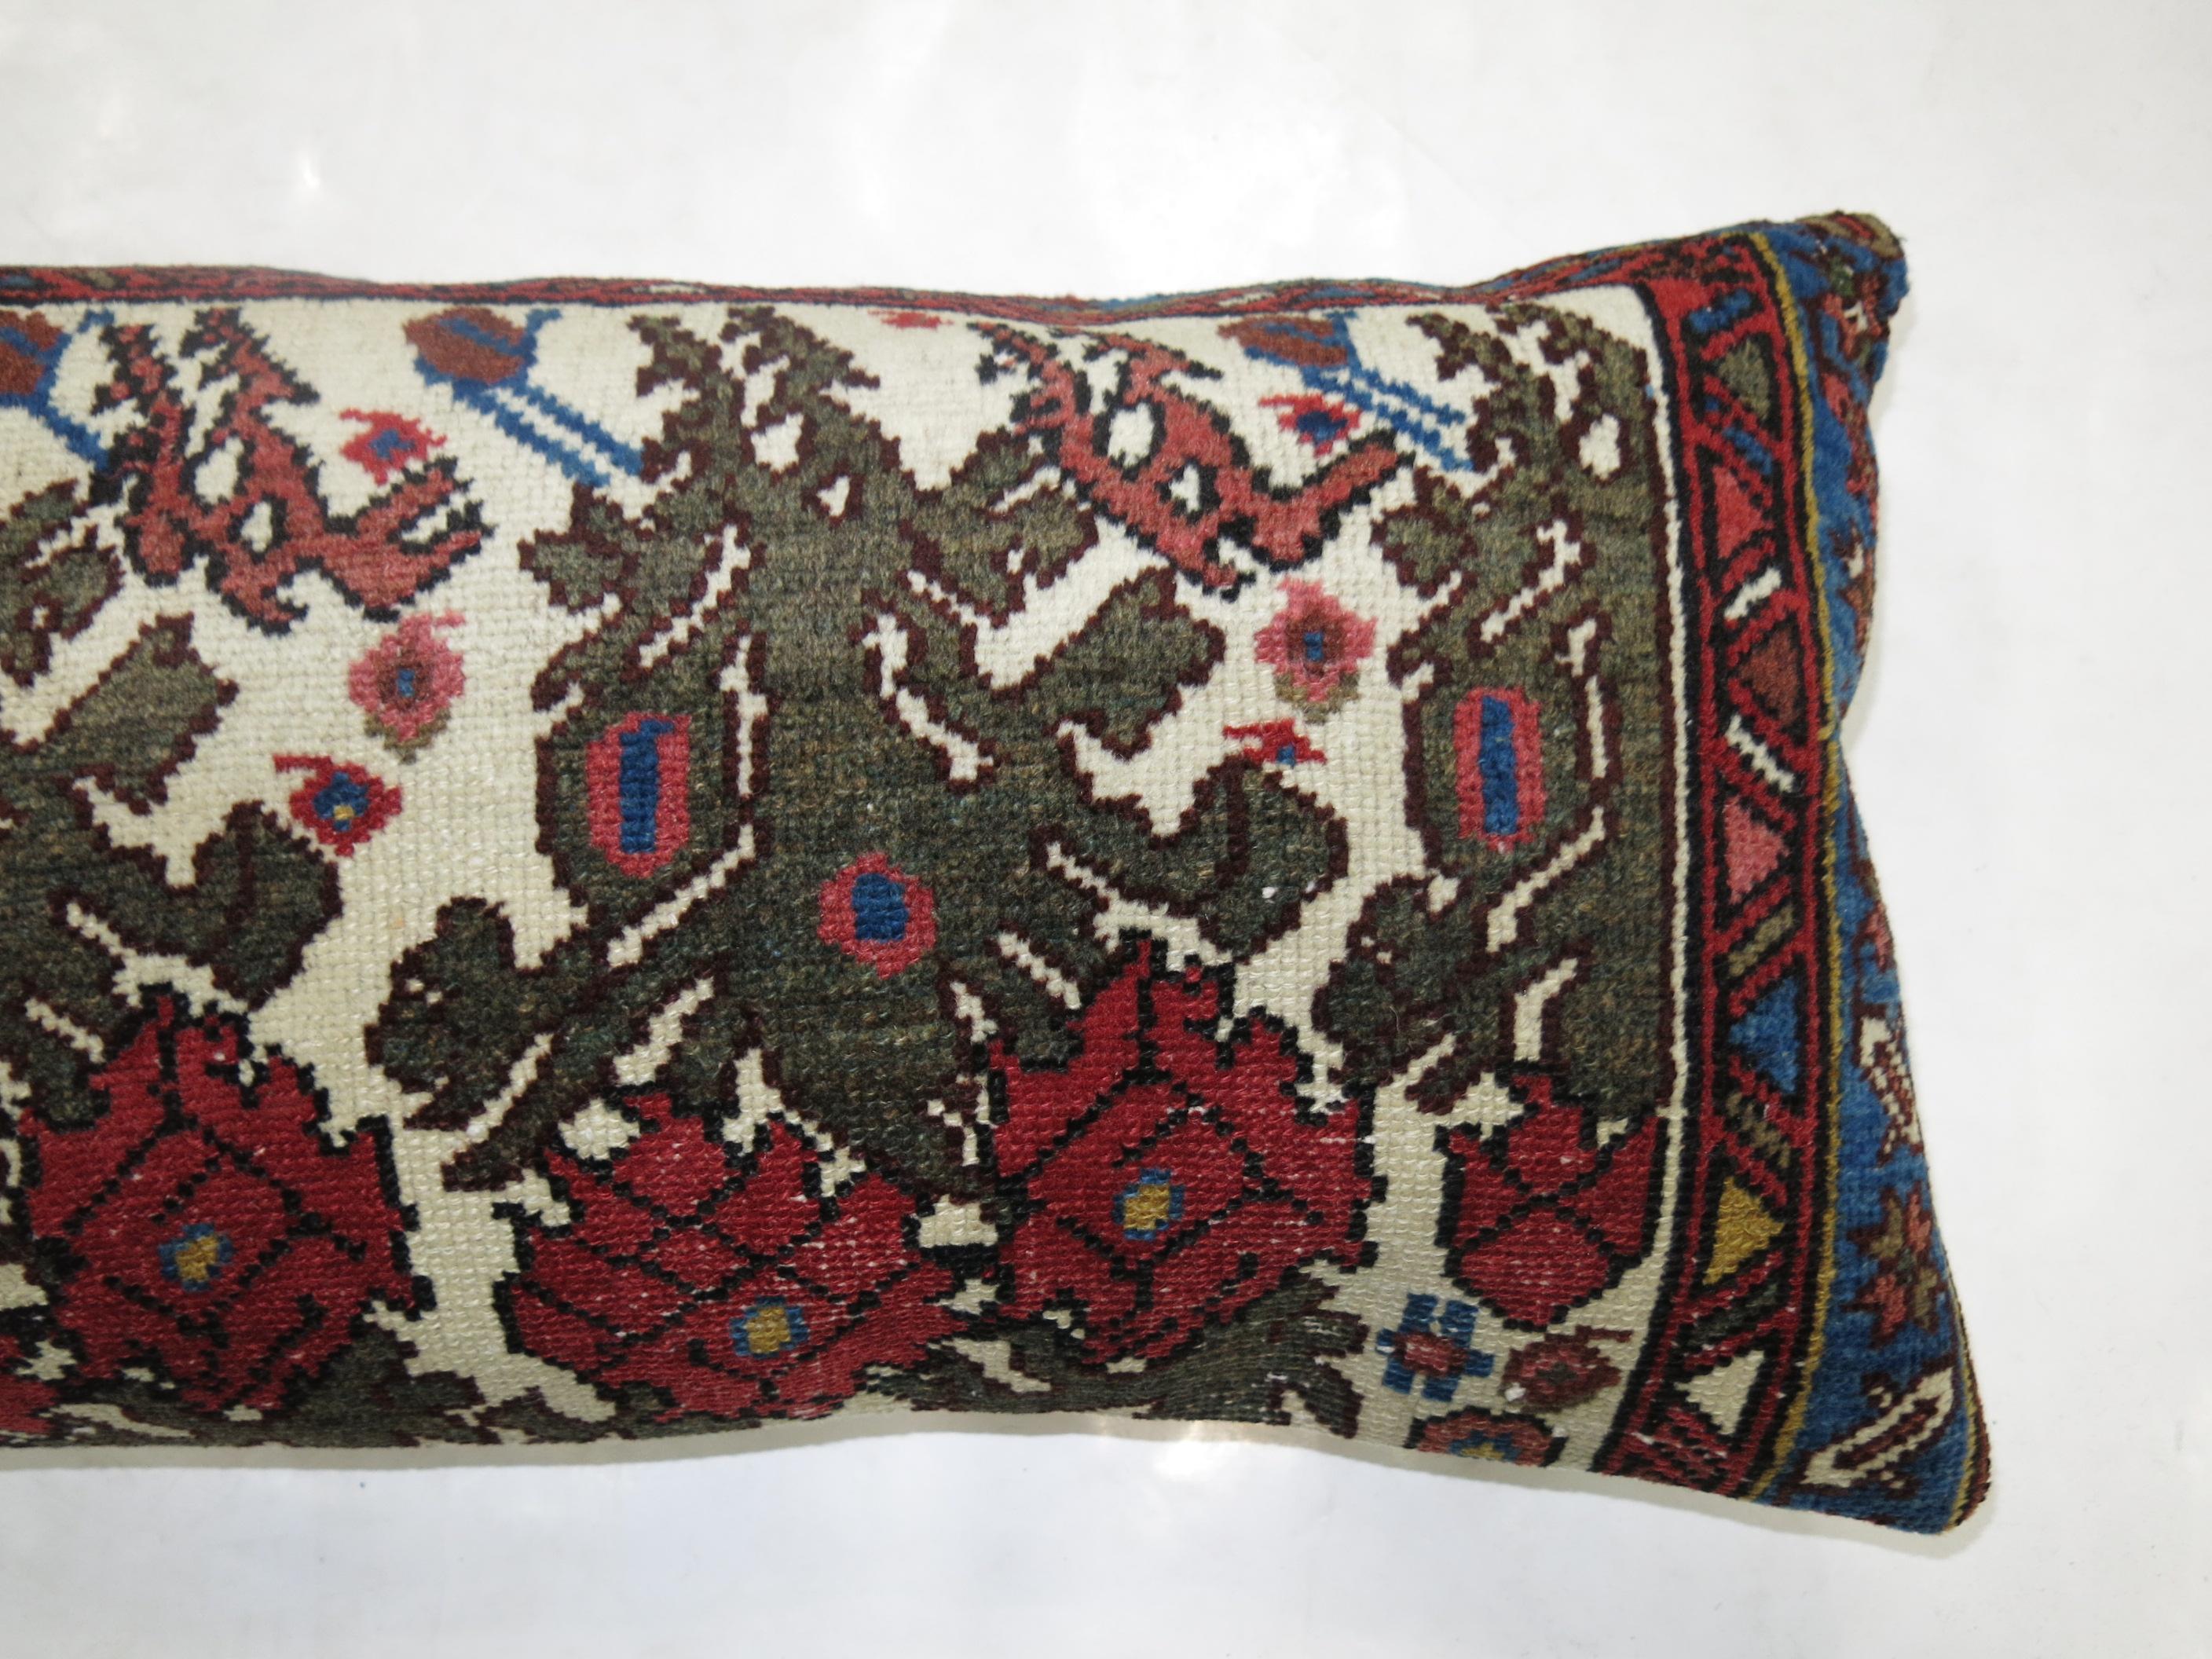 Bolster-size pillow from a vintage Persian rug.

14'' x 26''